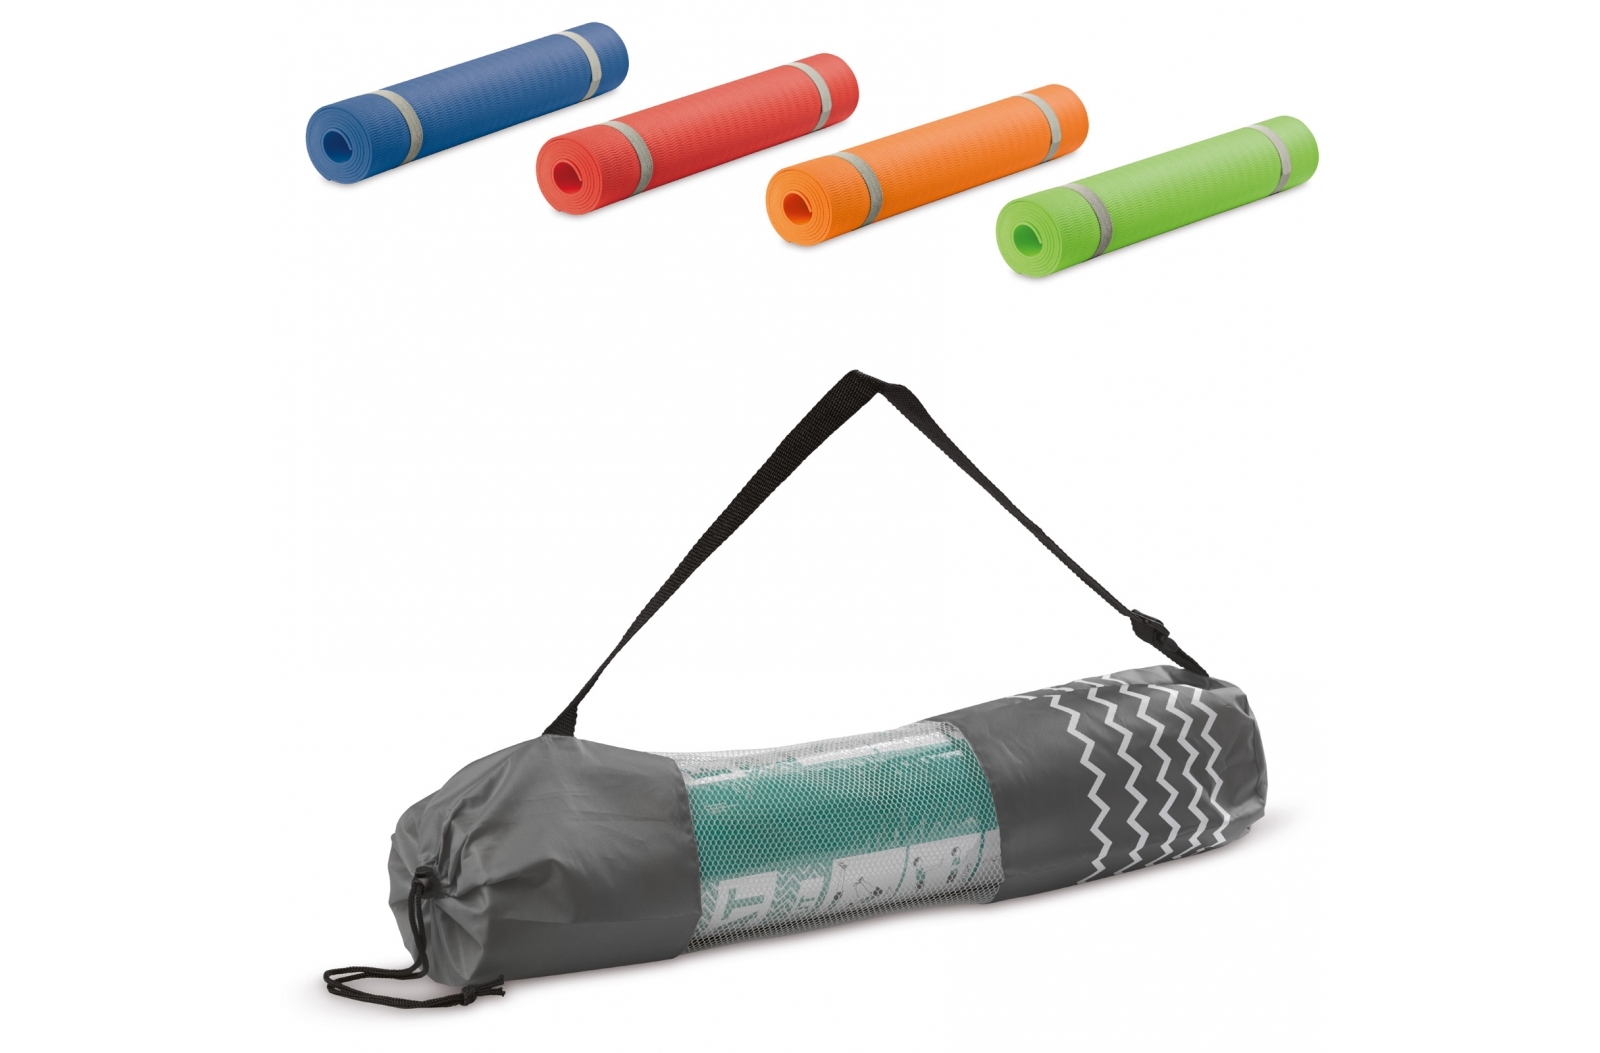 4mm Thick Fitness Mat with Carrying Bag - Deal